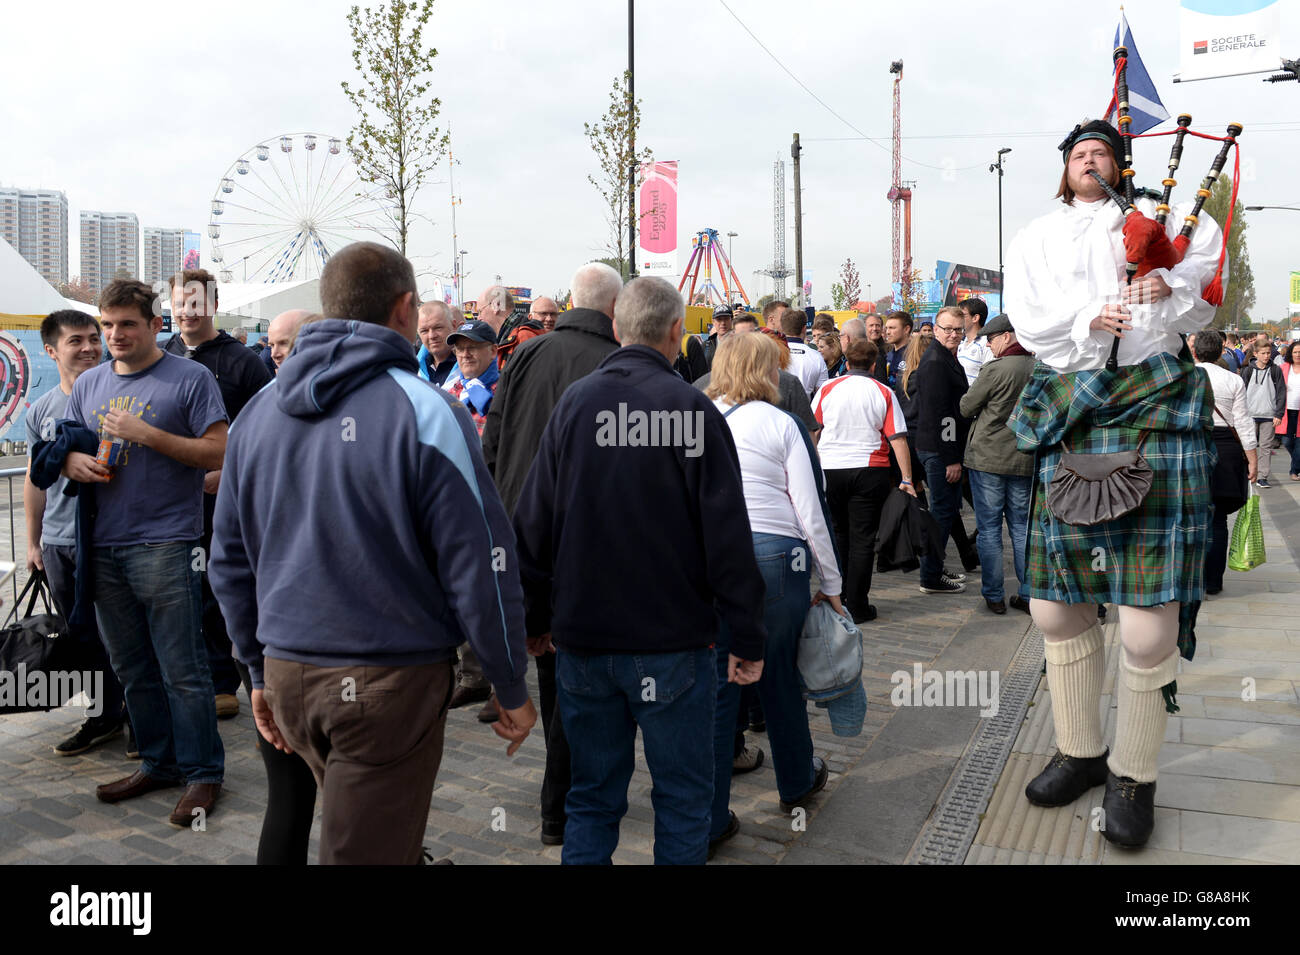 A bagpiper plays outside the fanzone in Newcastle ahead of the World Cup Match at St James' Park, Newcastle. Stock Photo